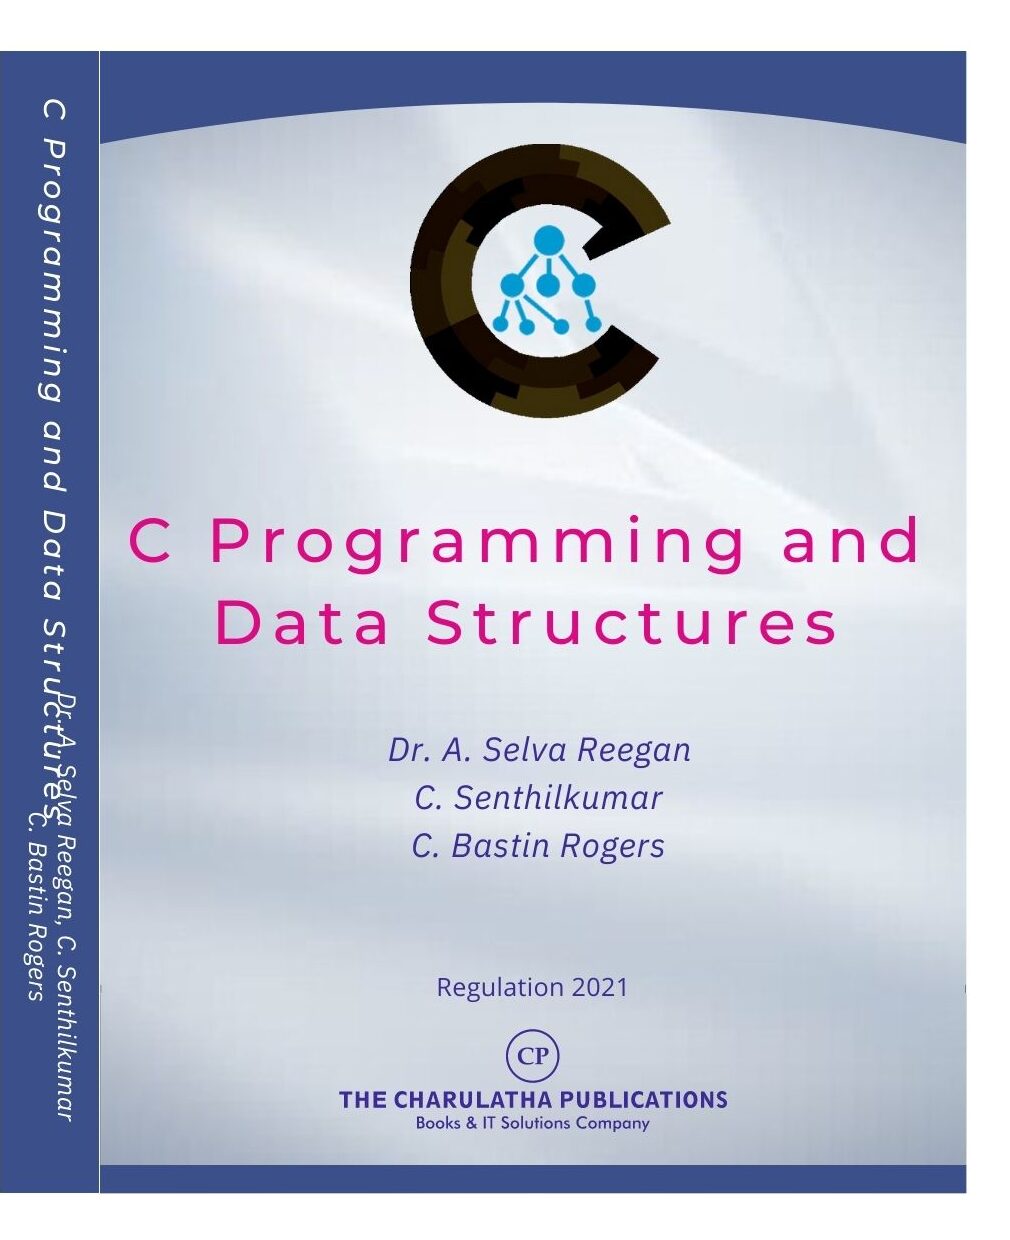 The charulatha publications C programming and data structures